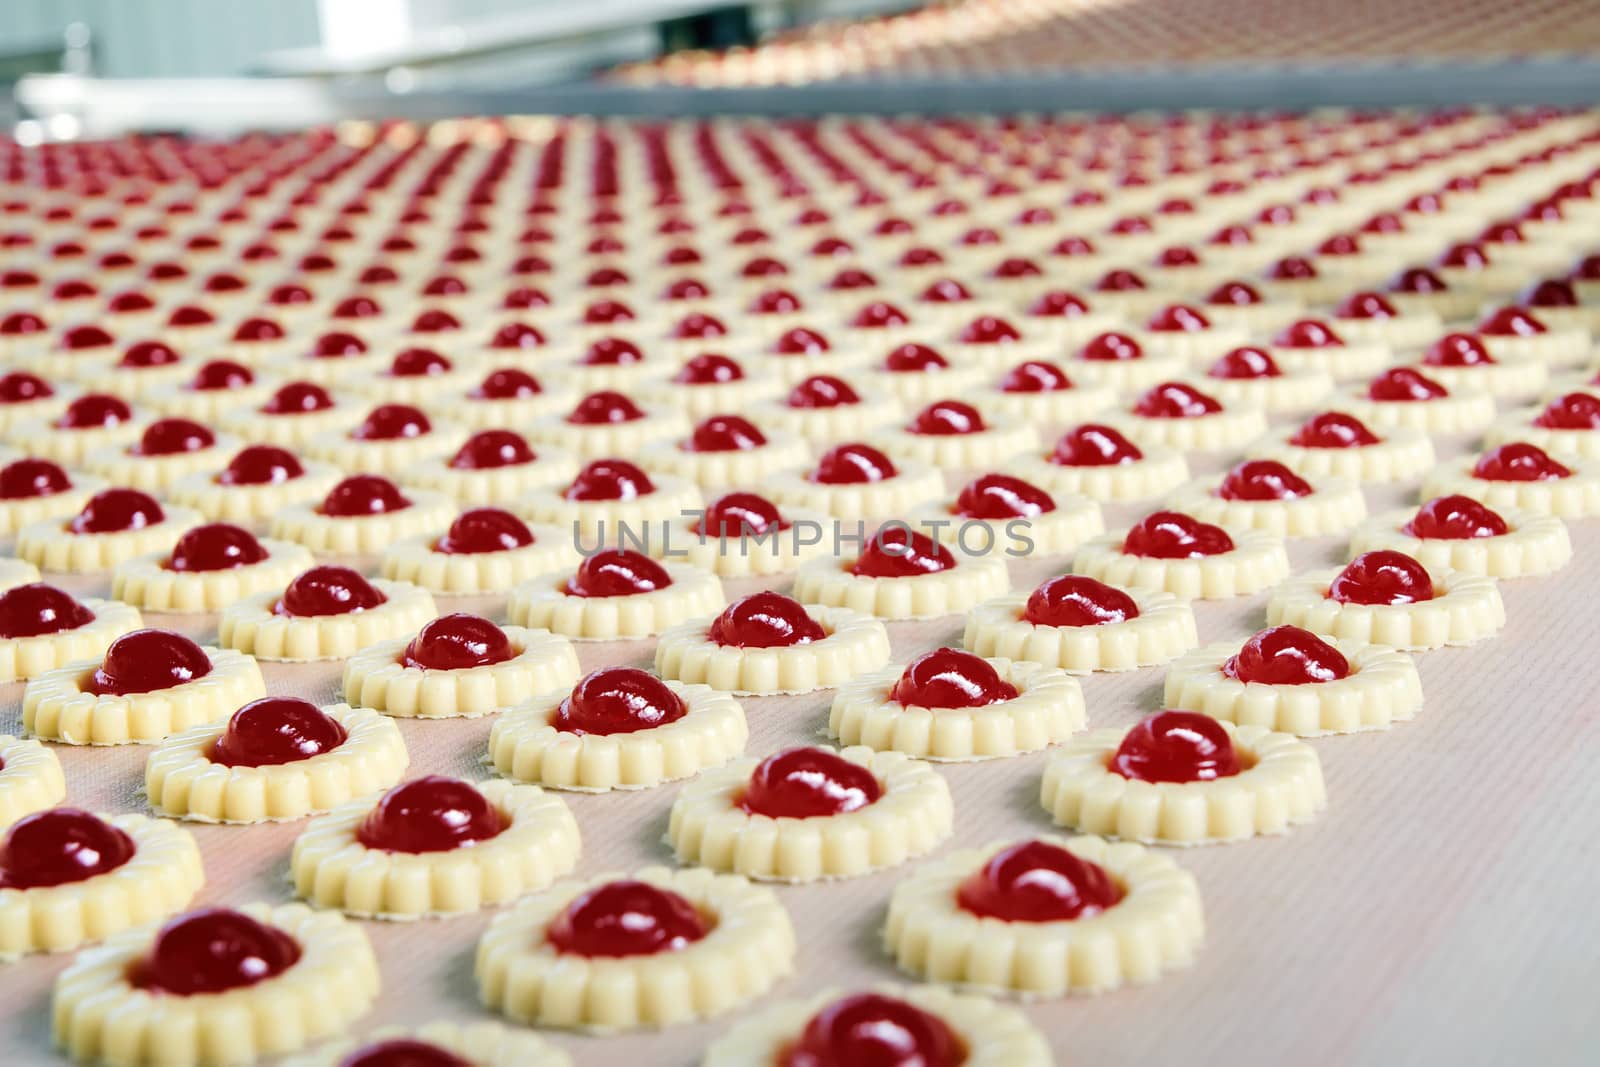 Production of biscuits